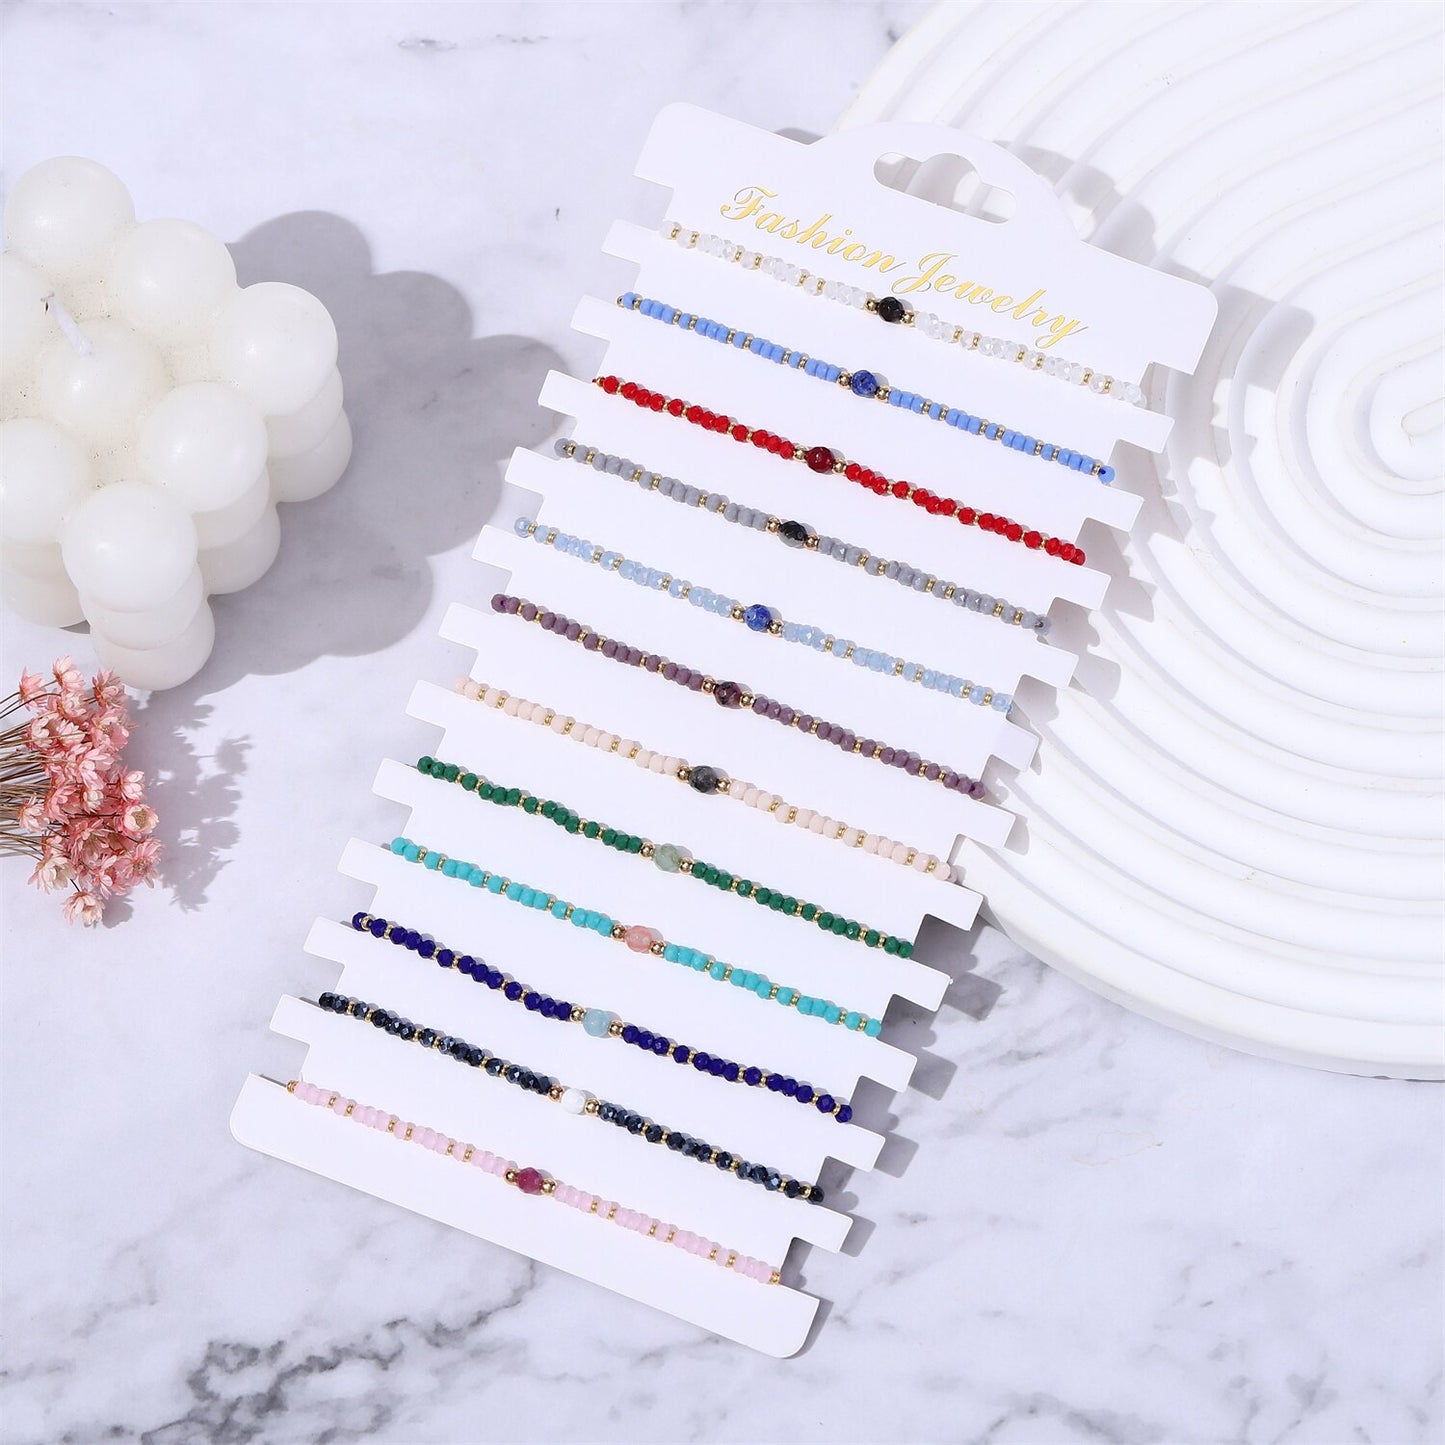 Boho 12Pcs/Lot  Seed Beads Natural Stone Charms Bracelets Adjustable String Wish Bracelets Jewelry Gifts for Girls Wholesale